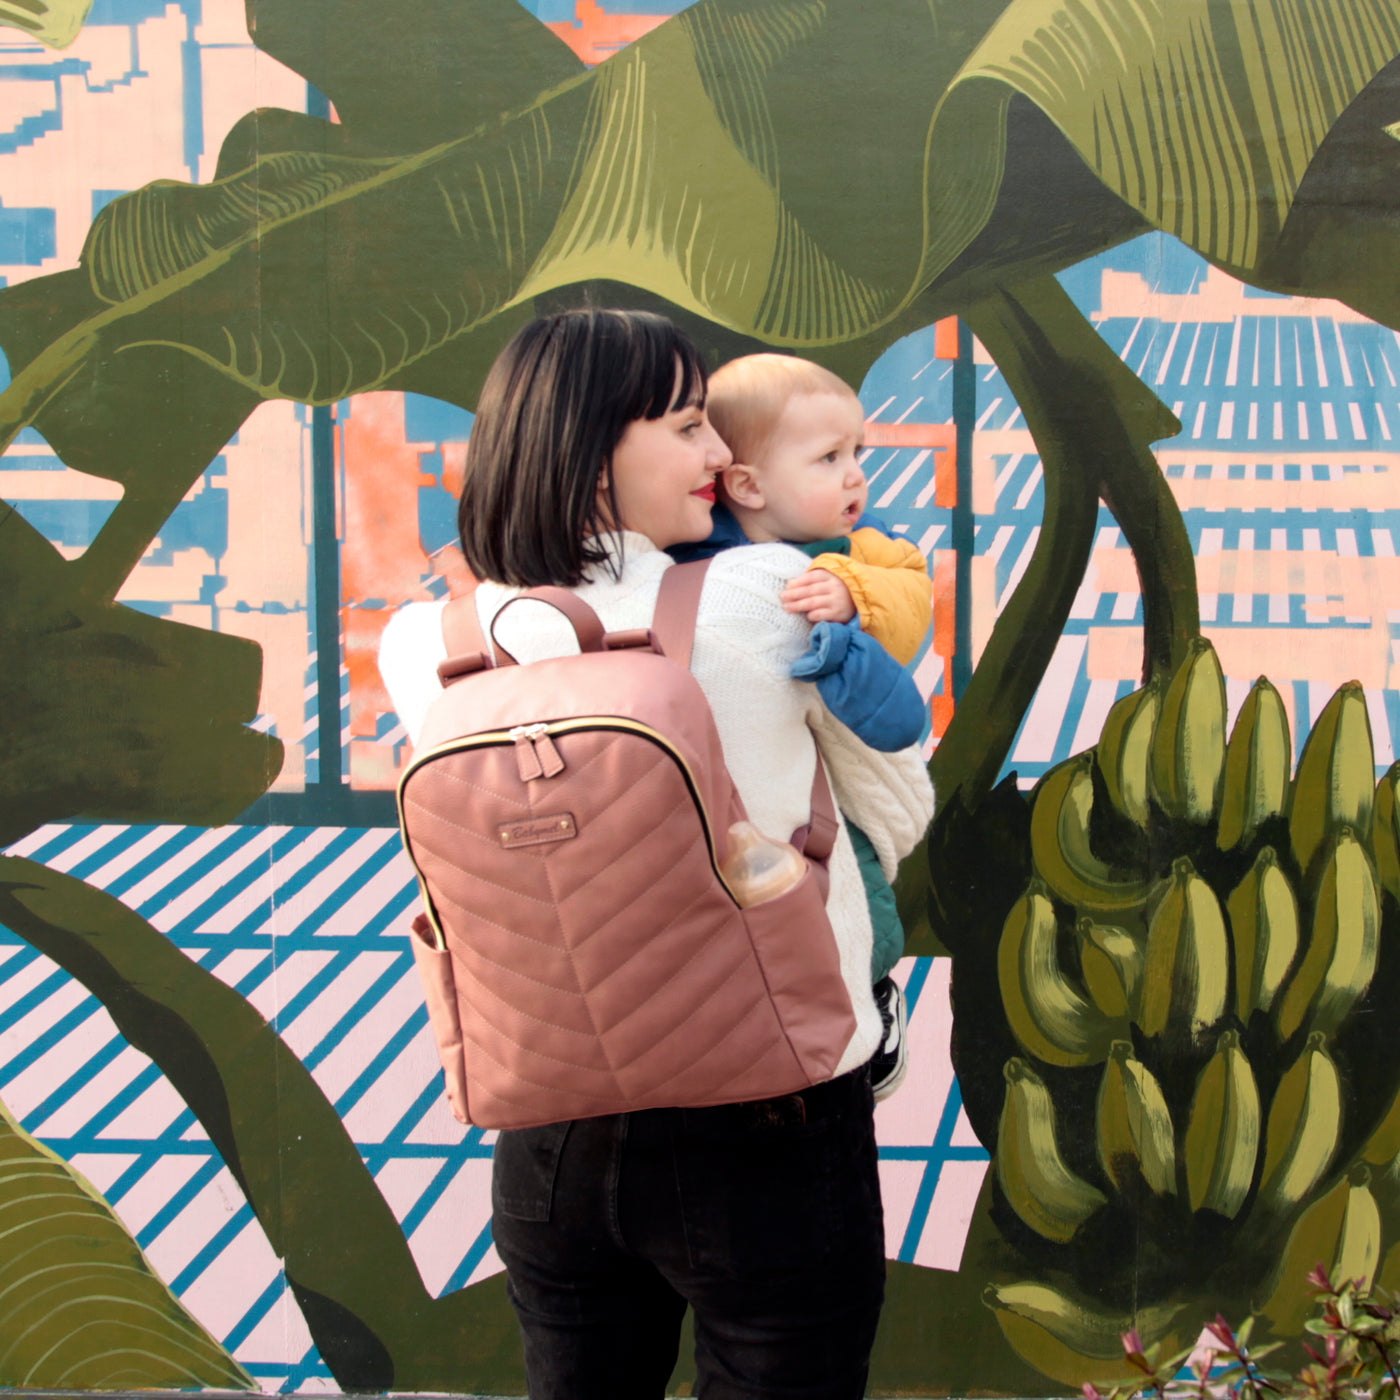 Babymel | Gabby Backpack Nappy Bag with Vegan Faux Leather - Dusty Pink - Belly Beyond 